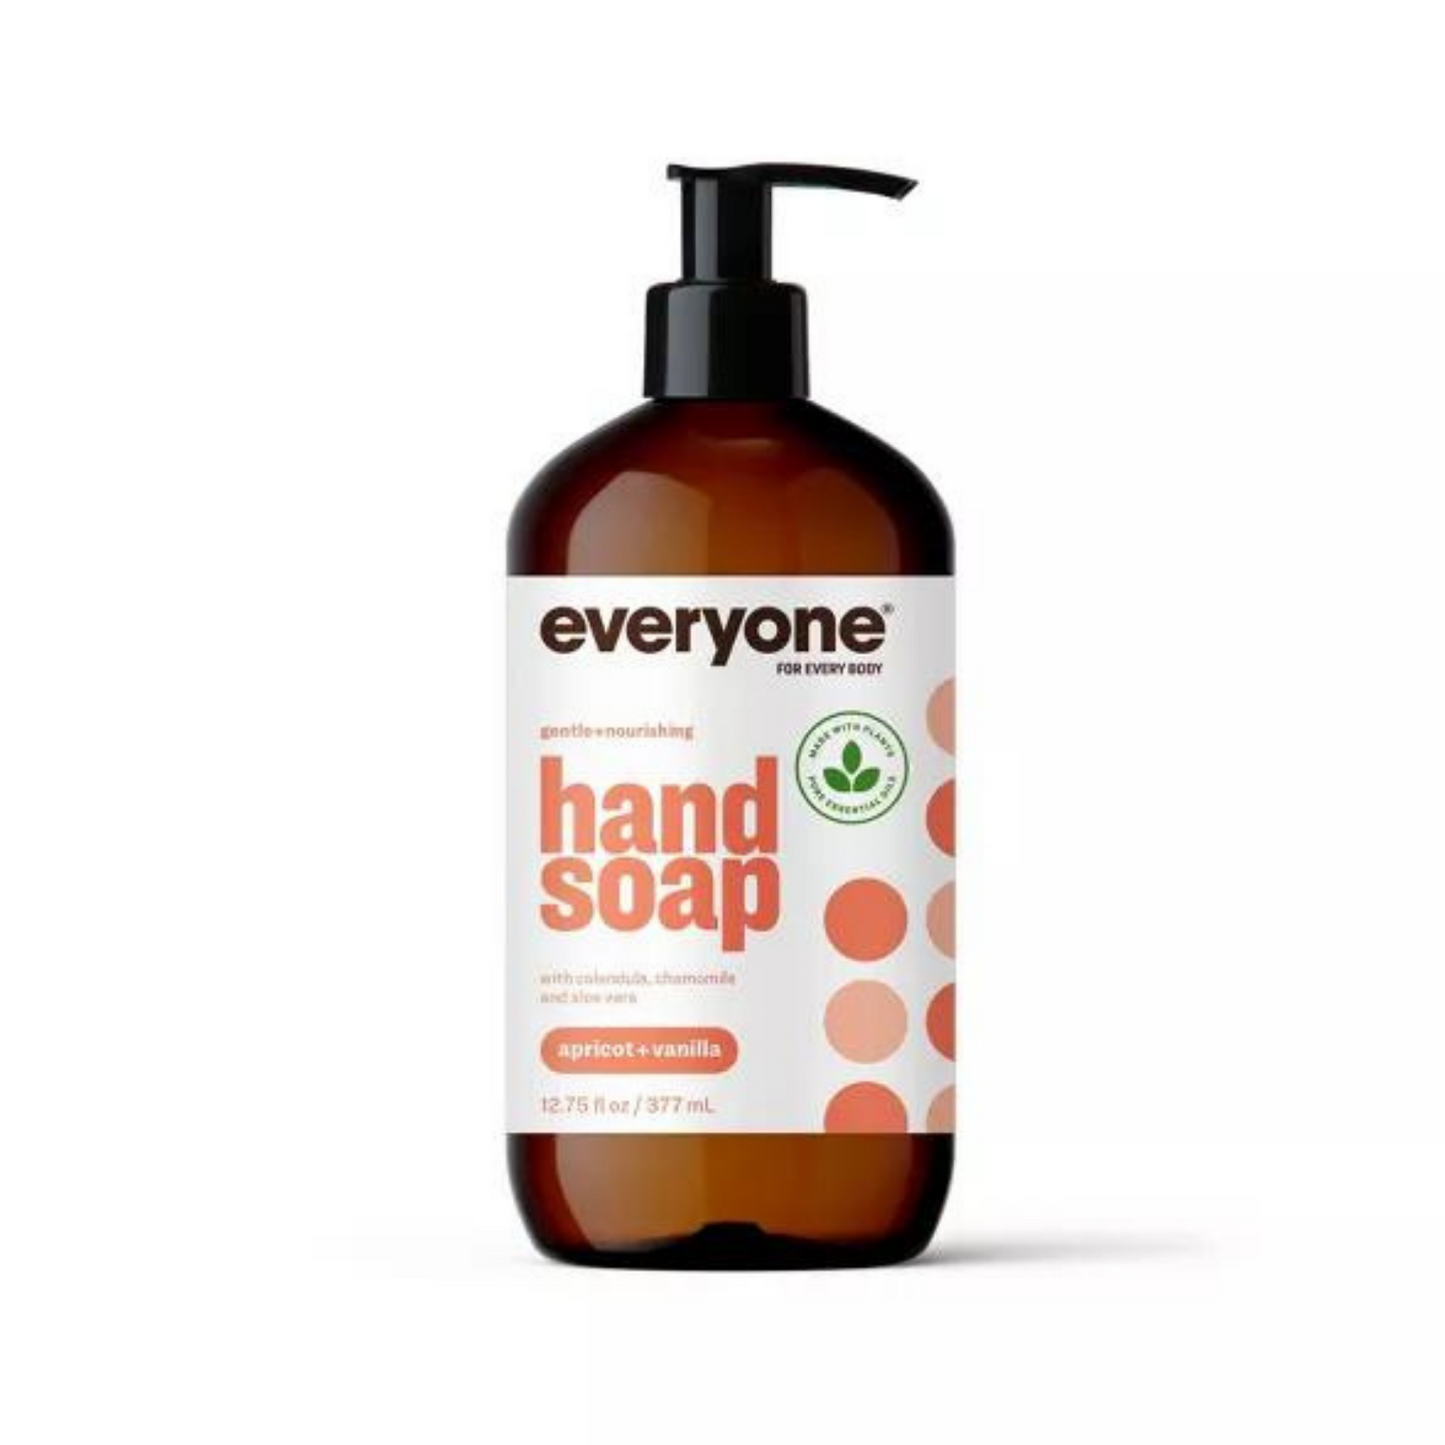 Primary image of Everyone Apricot + Vanilla Hand Soap